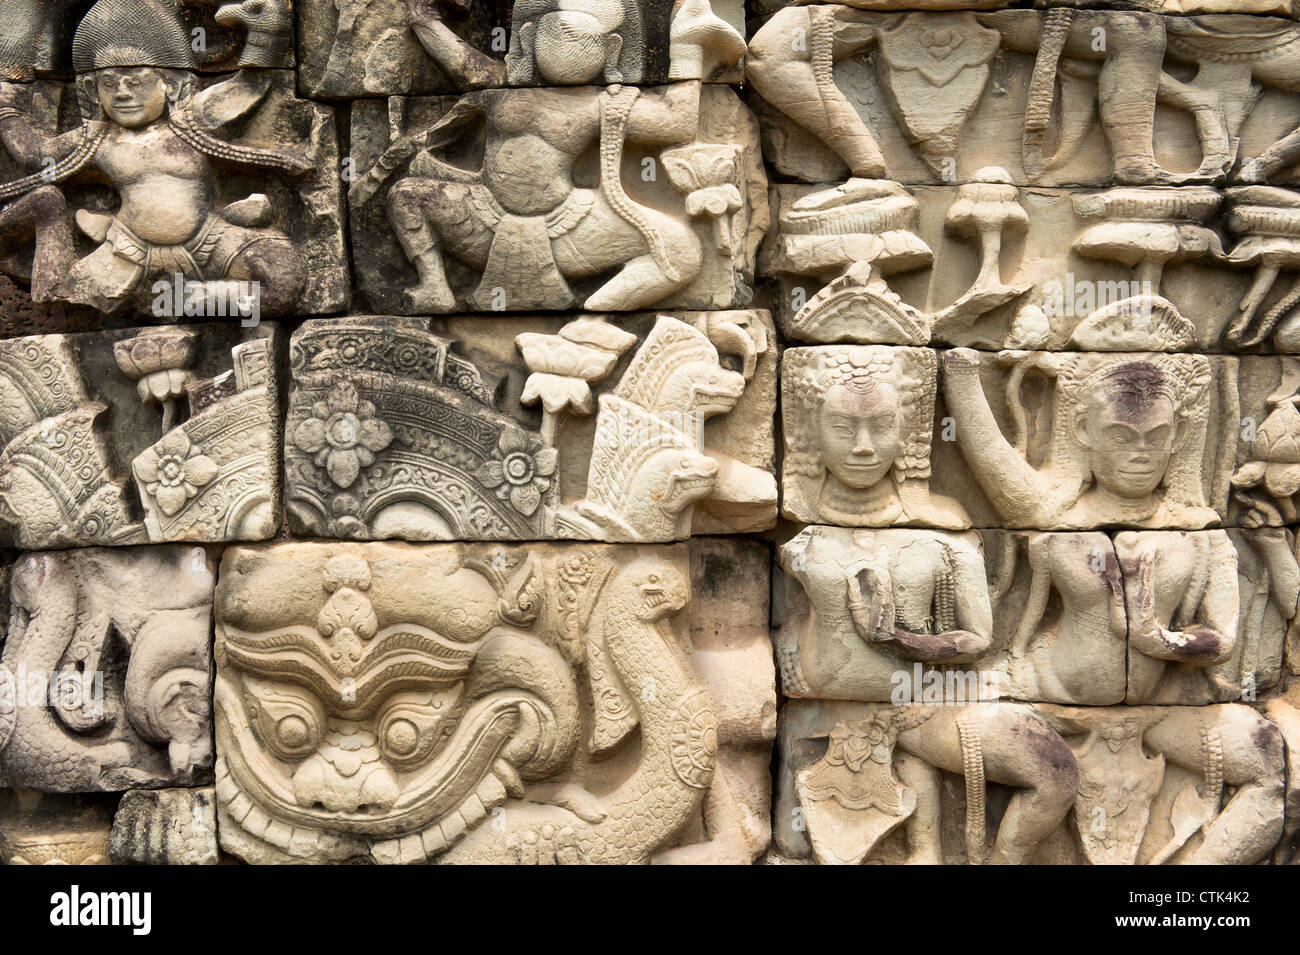 CAMBODIA, ANGKOR, Terrace of the Elephants. Assorted characters carving on Stone Wall. Stock Photo